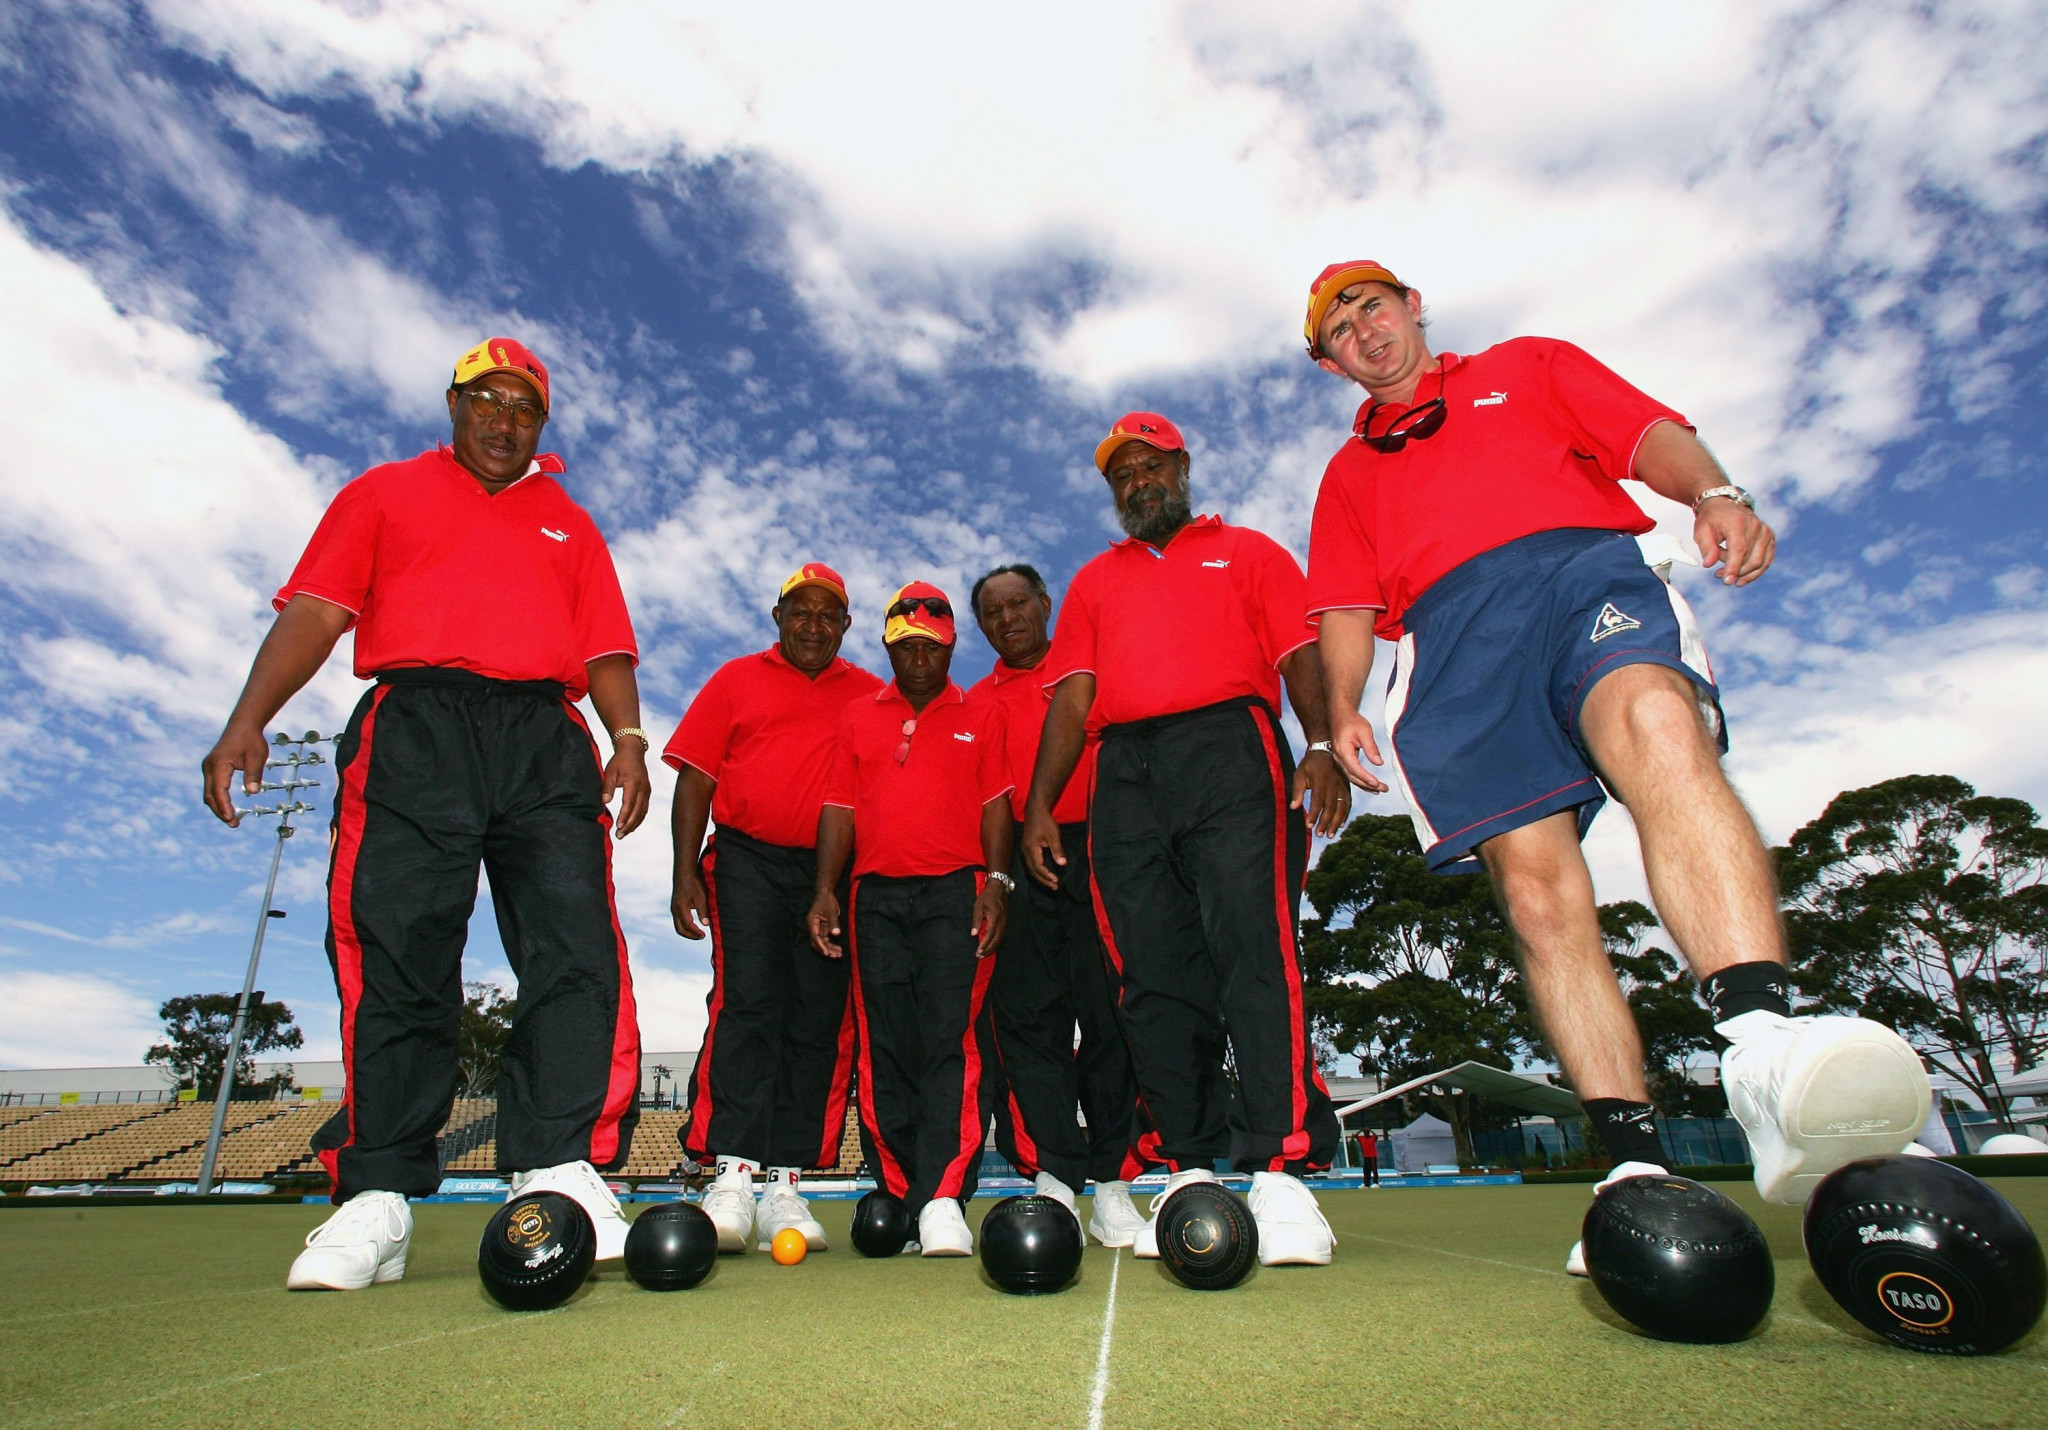 The lawn bowls community in Papua New Guinea has expressed concern over the structure of Bowls PNG ©Getty Images